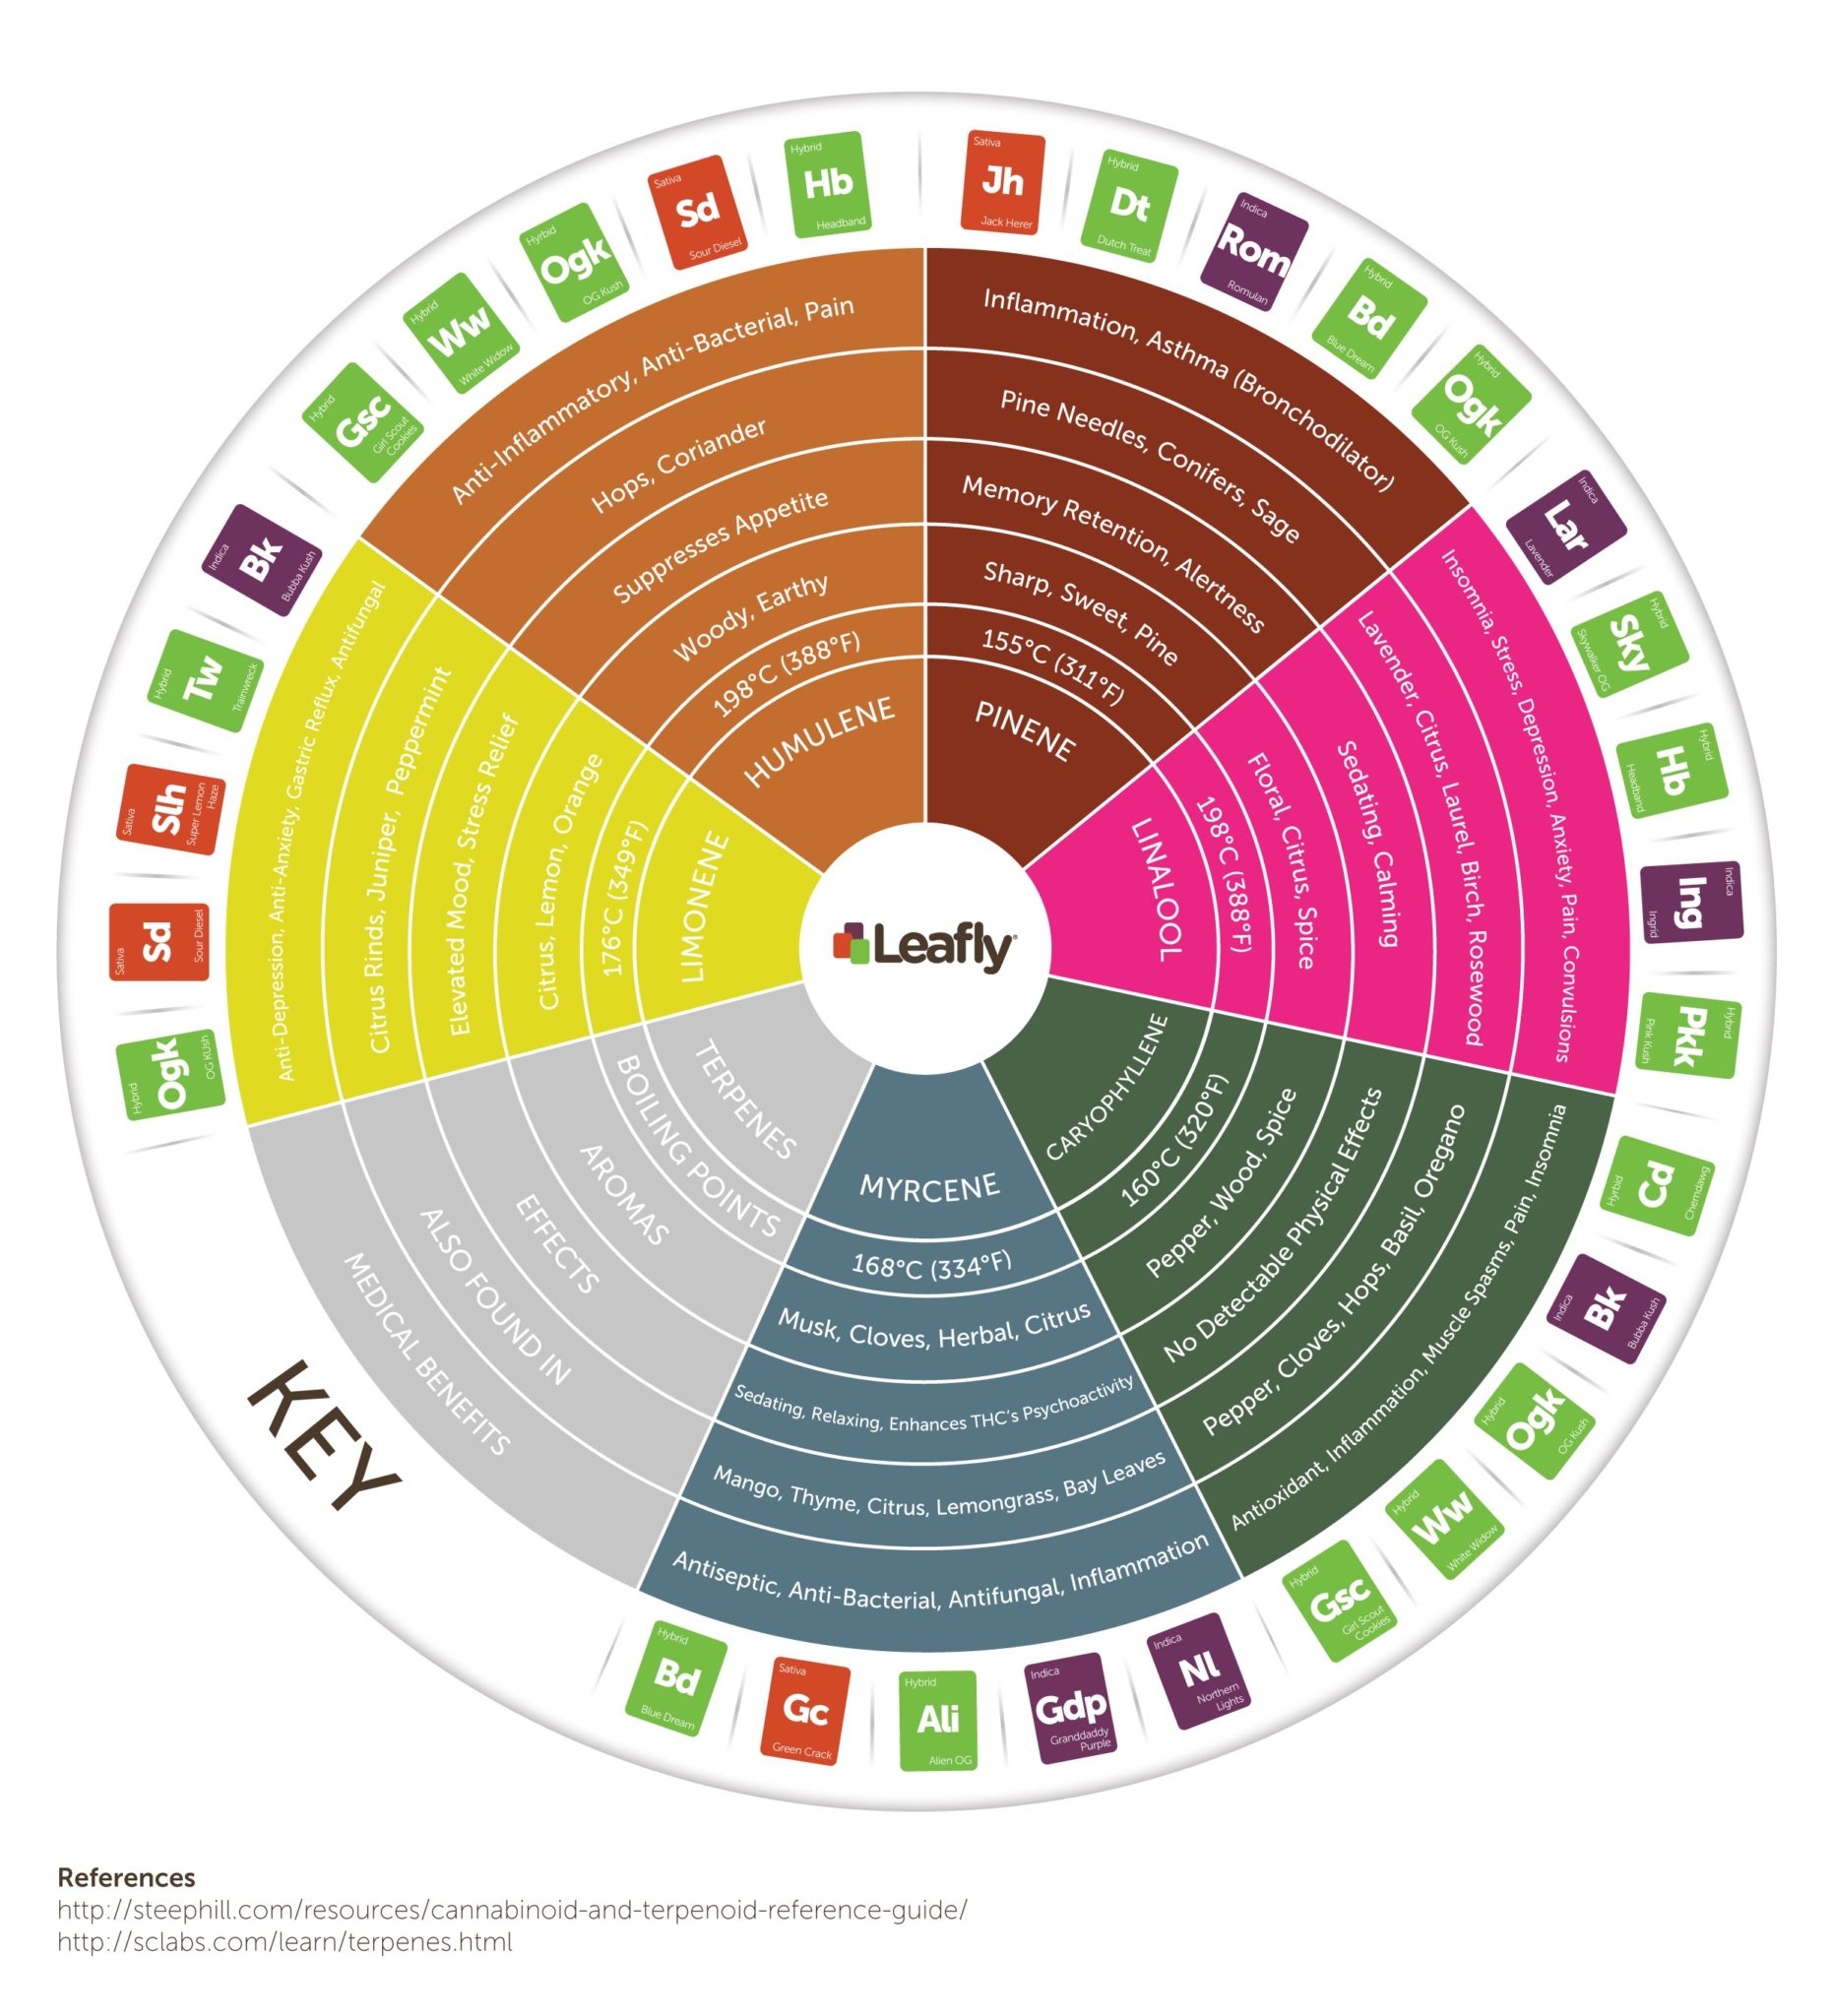 Leafly Terpene Wheel showing all of the known terpenes and their therapeutic benefits